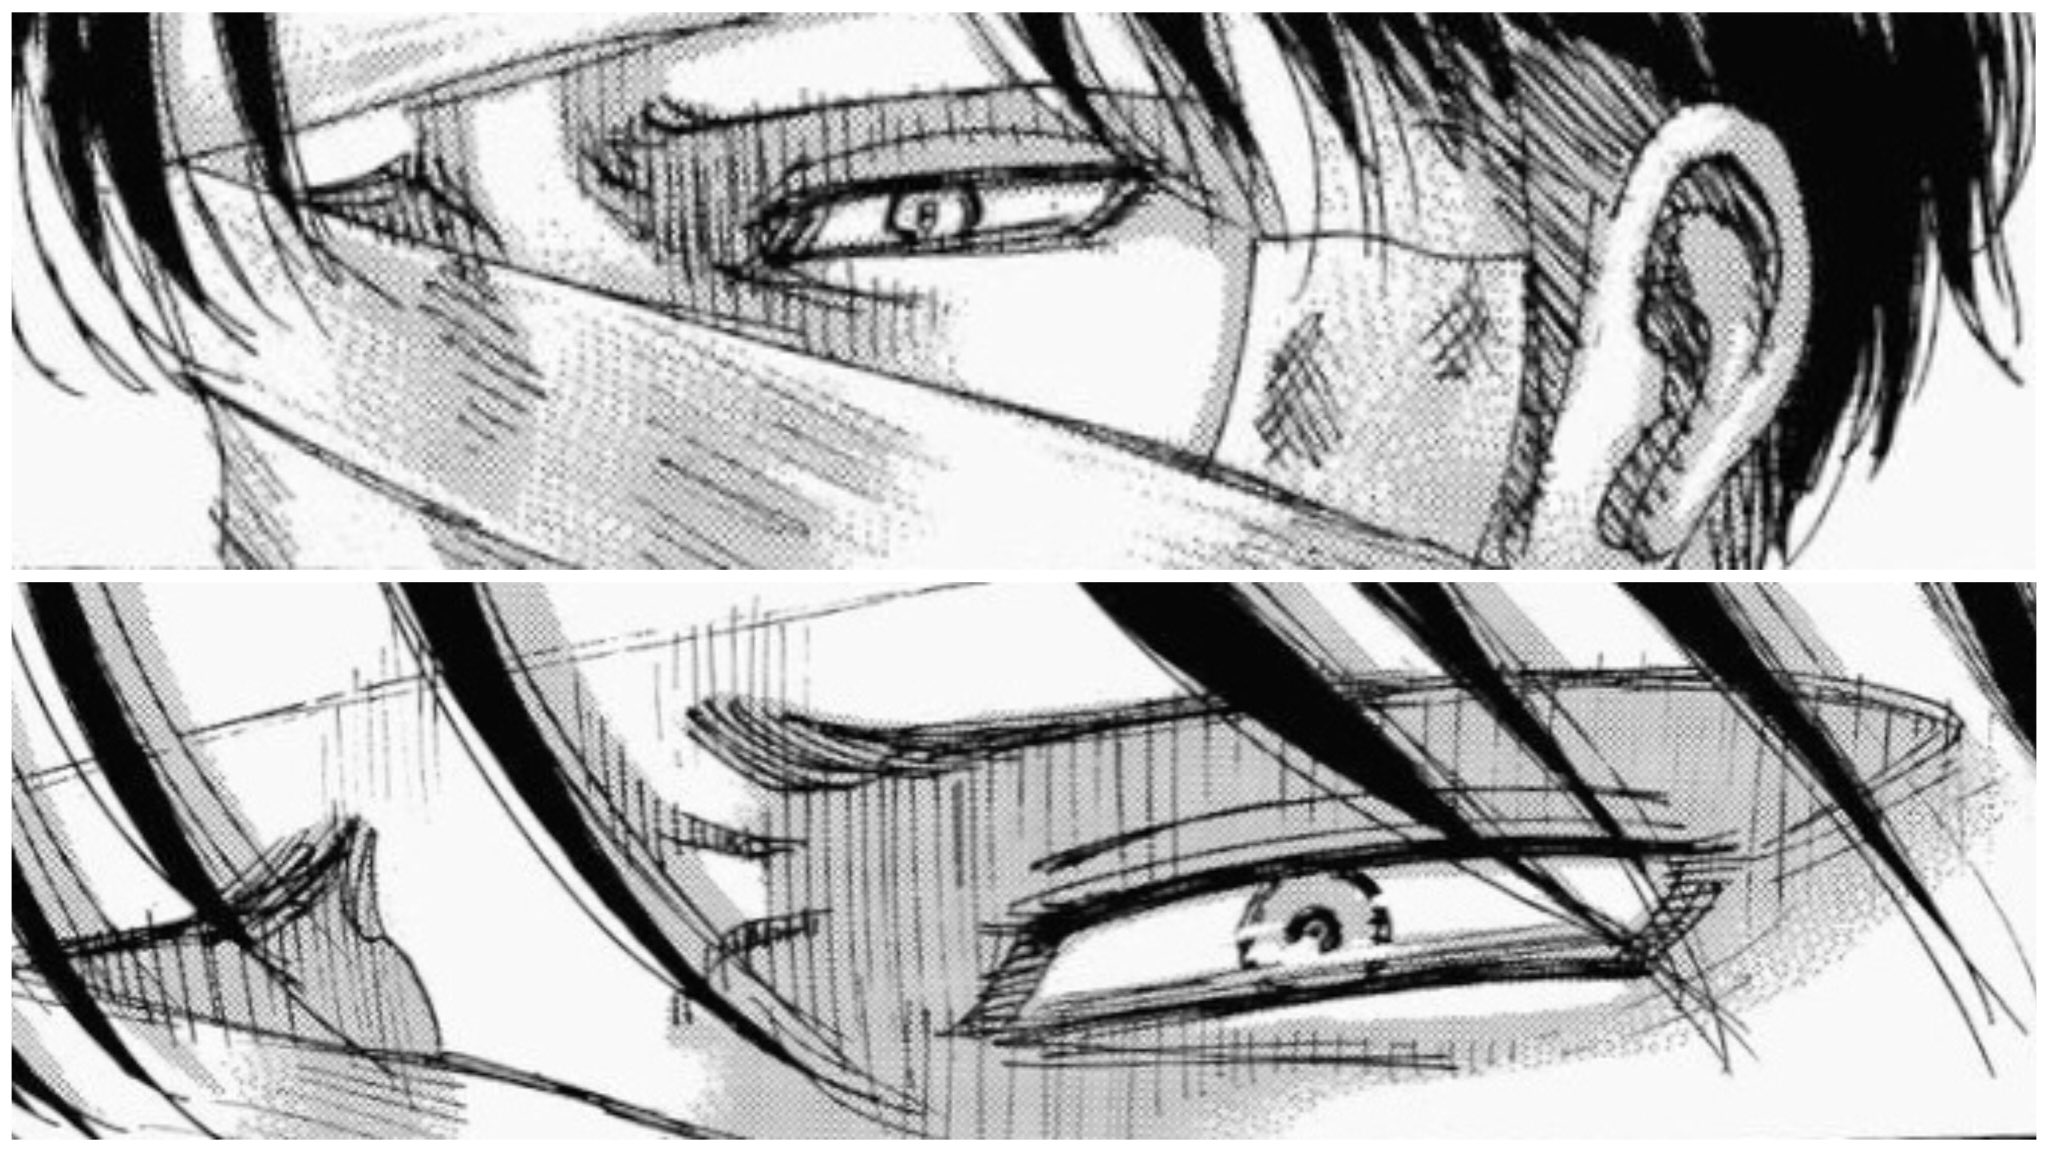 karma Twitter: "#aot136spoilers levi ackerman's eyes shows so much i'm actually emotional reading own POV 😭 https://t.co/jZppylpagO" / Twitter